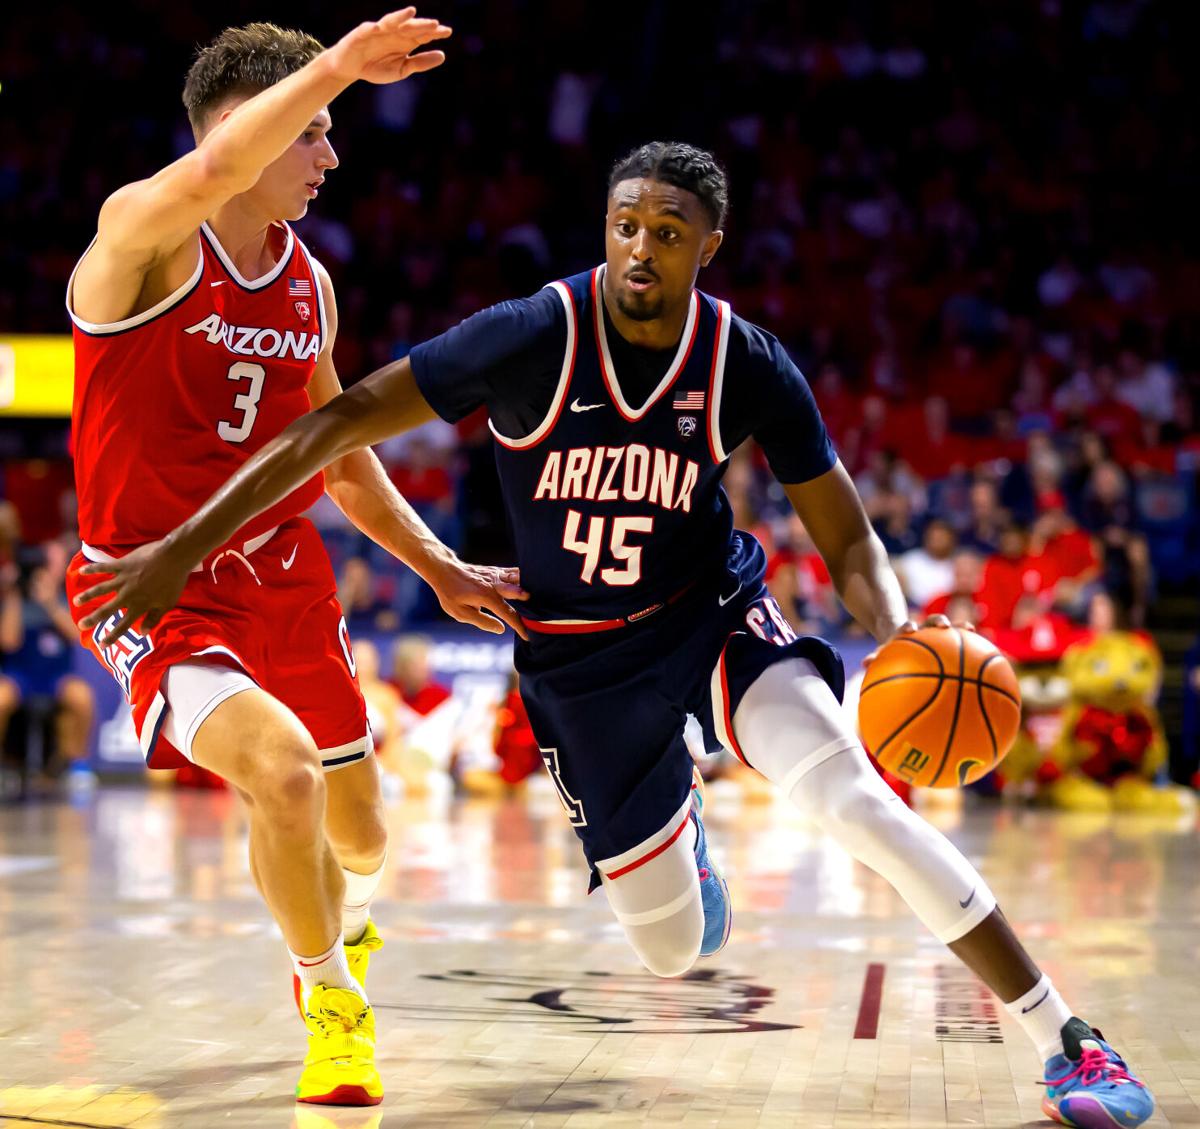 Arizona Men's Basketball's Red-Blue Game (LE)